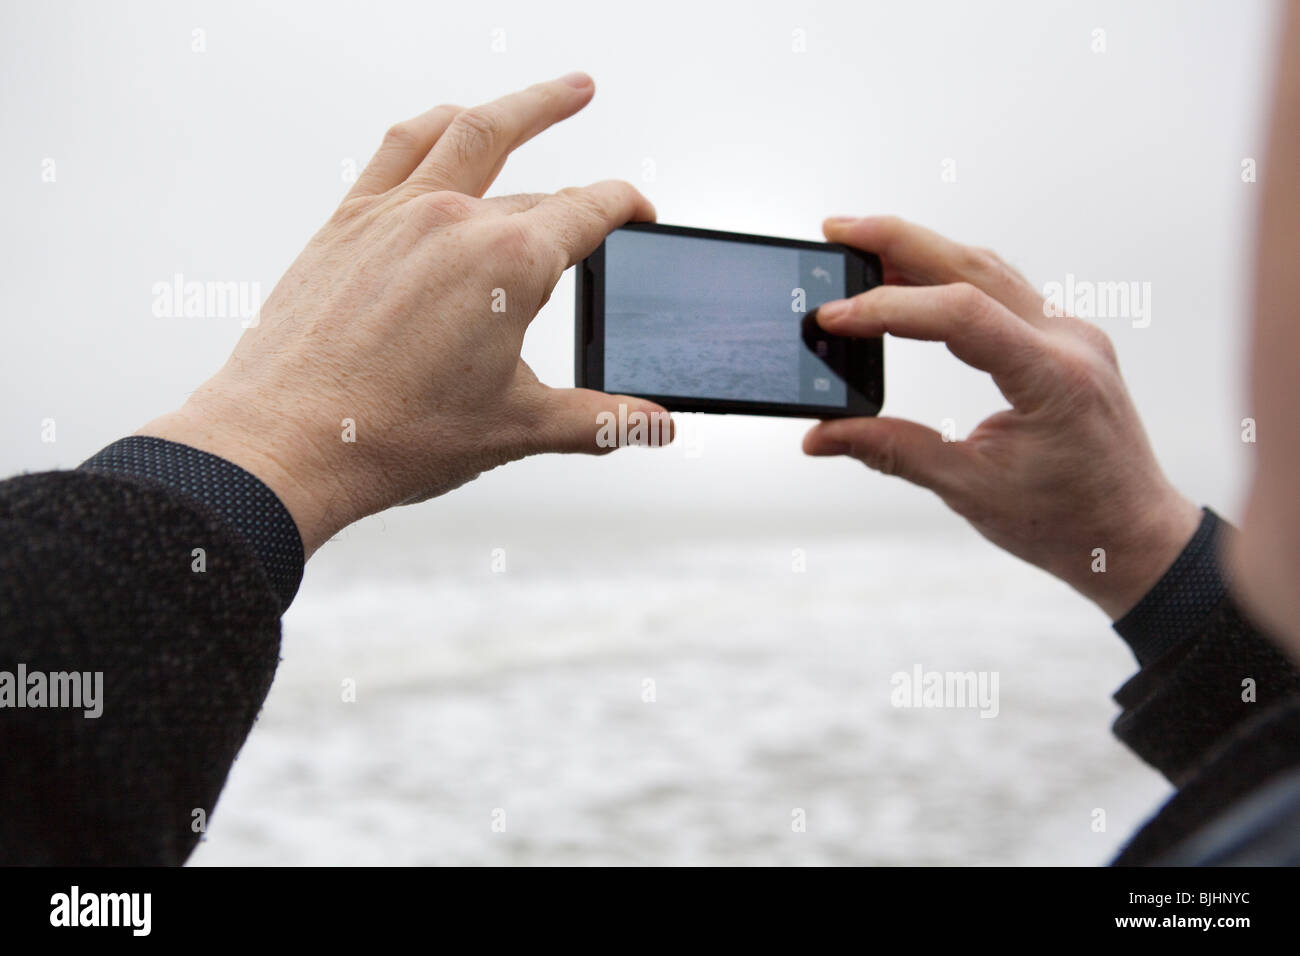 man taking photographs with a camera phone Stock Photo